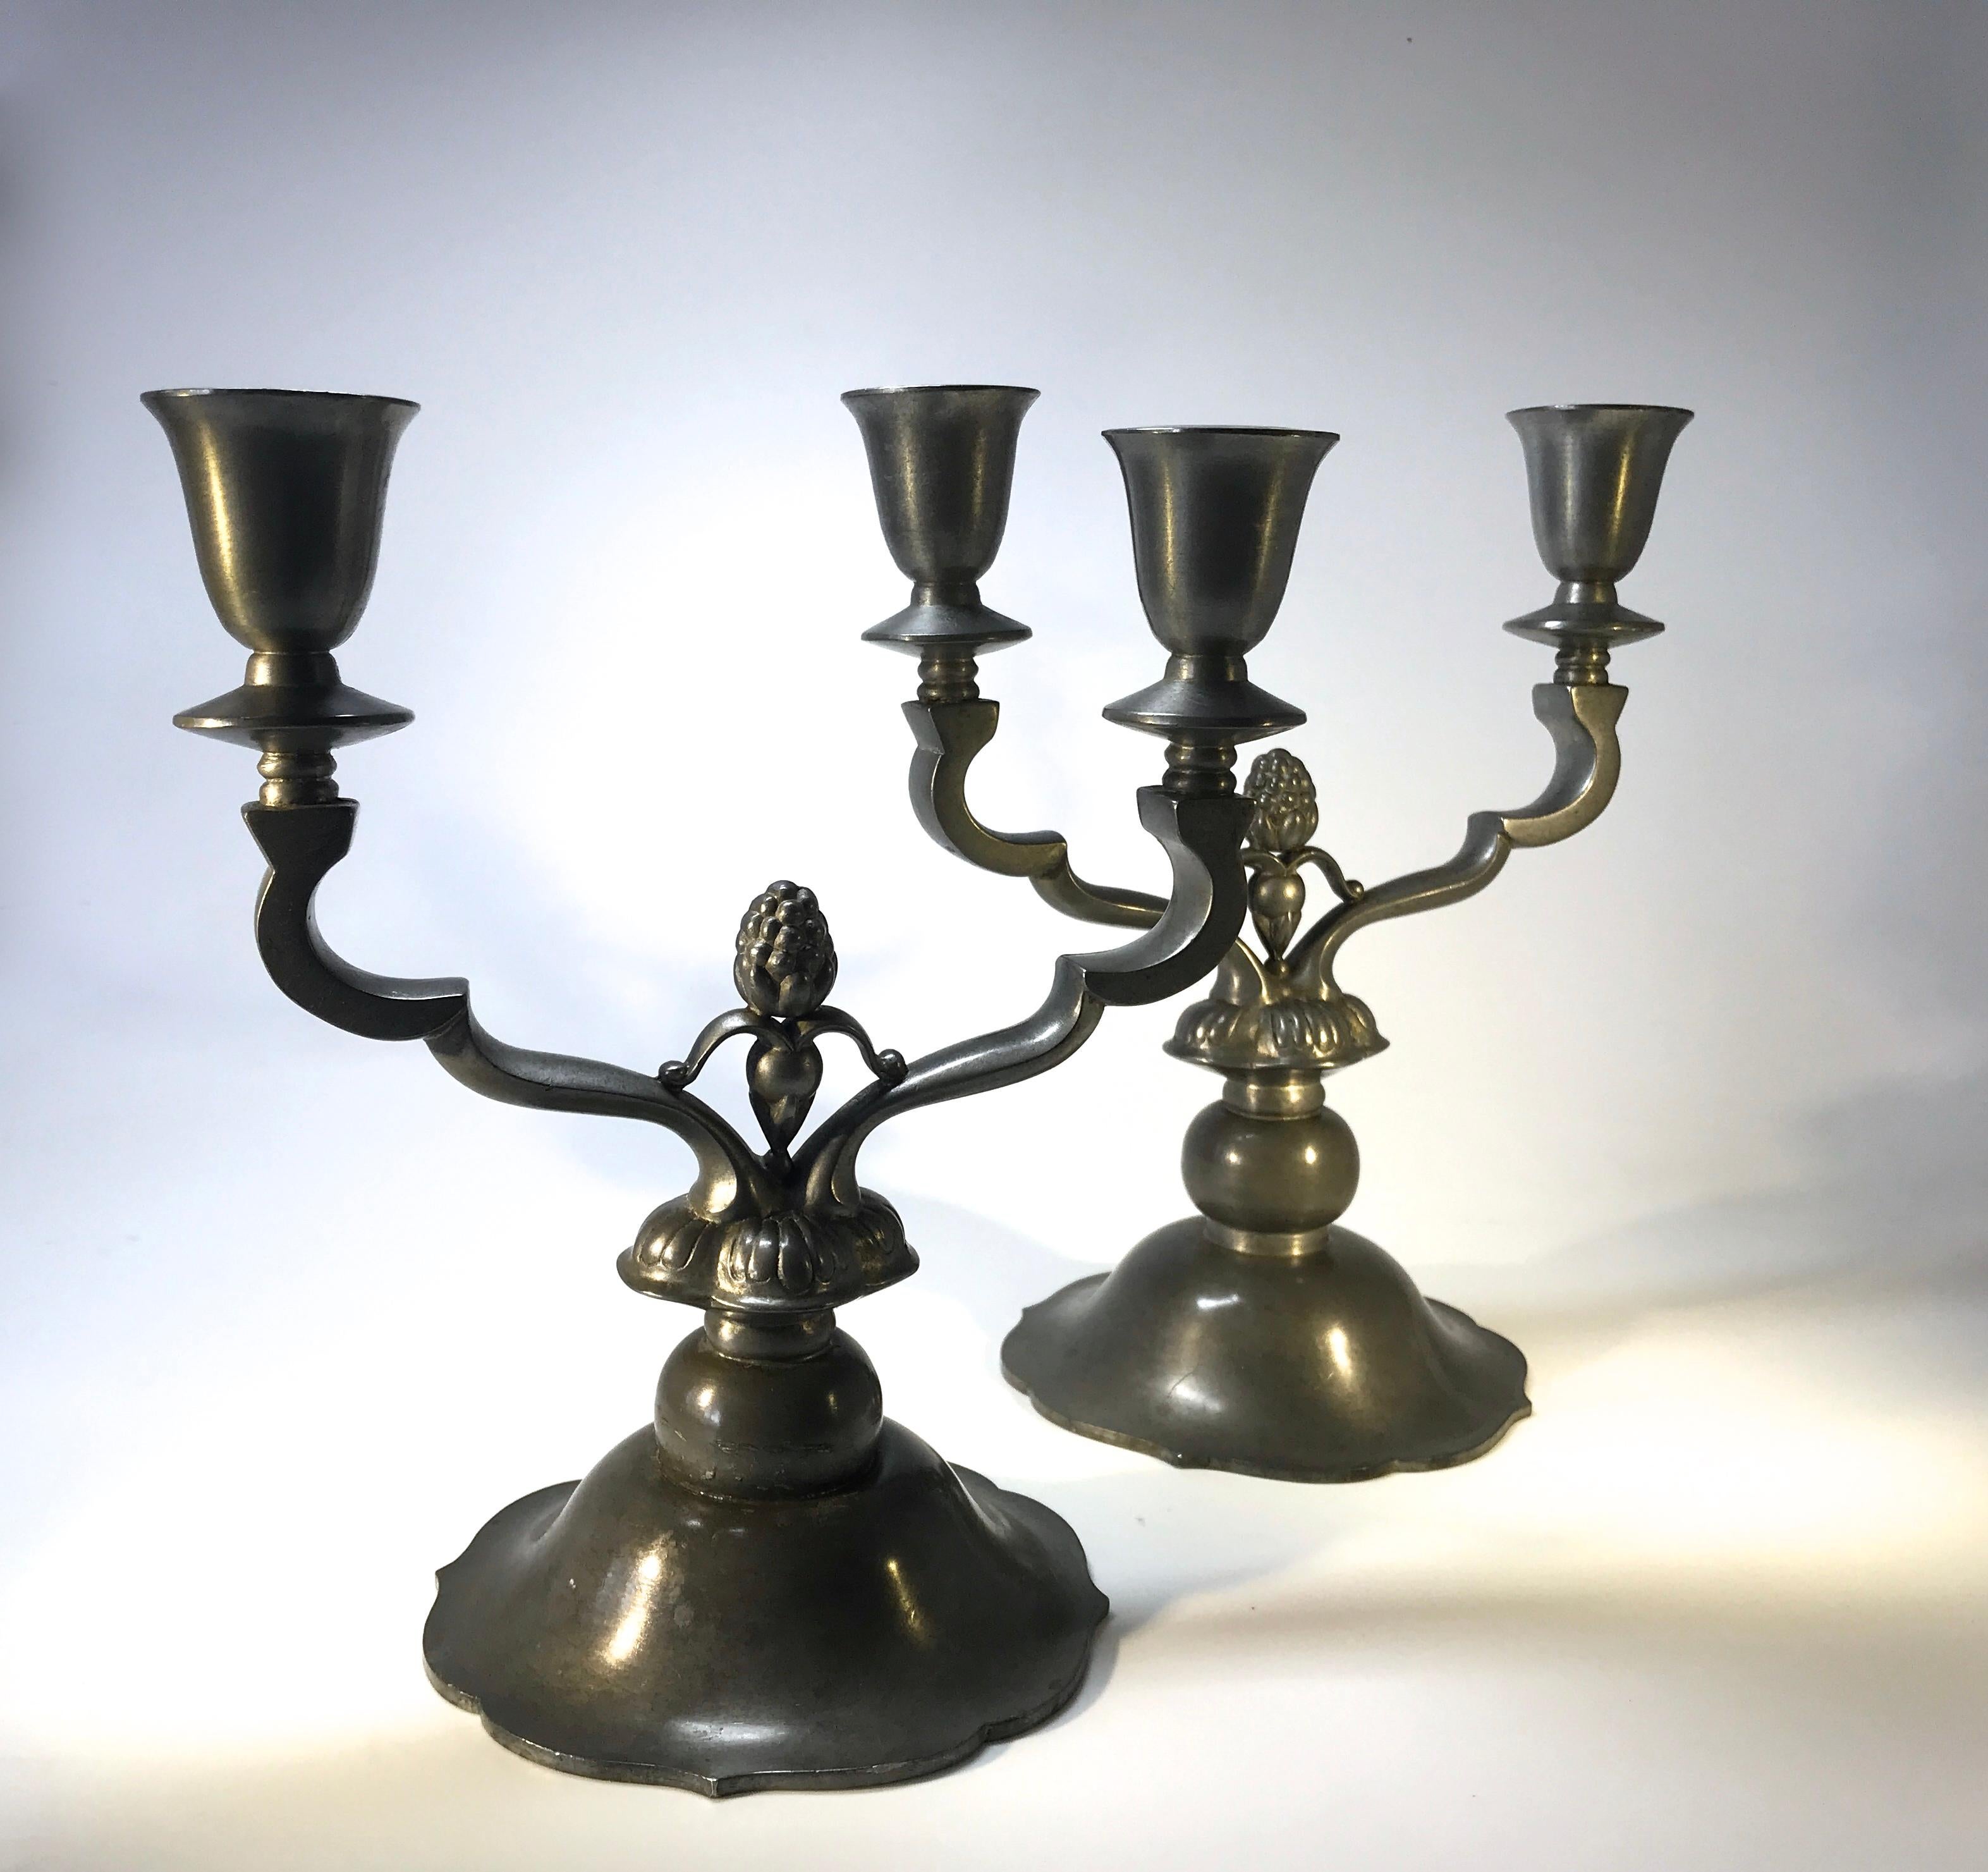 A superb pair of Just Andersen, Denmark Scandinavian Art Deco pewter stylised candelabra
Noteworthy shape and size, one slightly taller than the other
Circa 1930's
Stamped and numbered MT307 on both weighted bases
Candelabra 1. Height 8 inch,